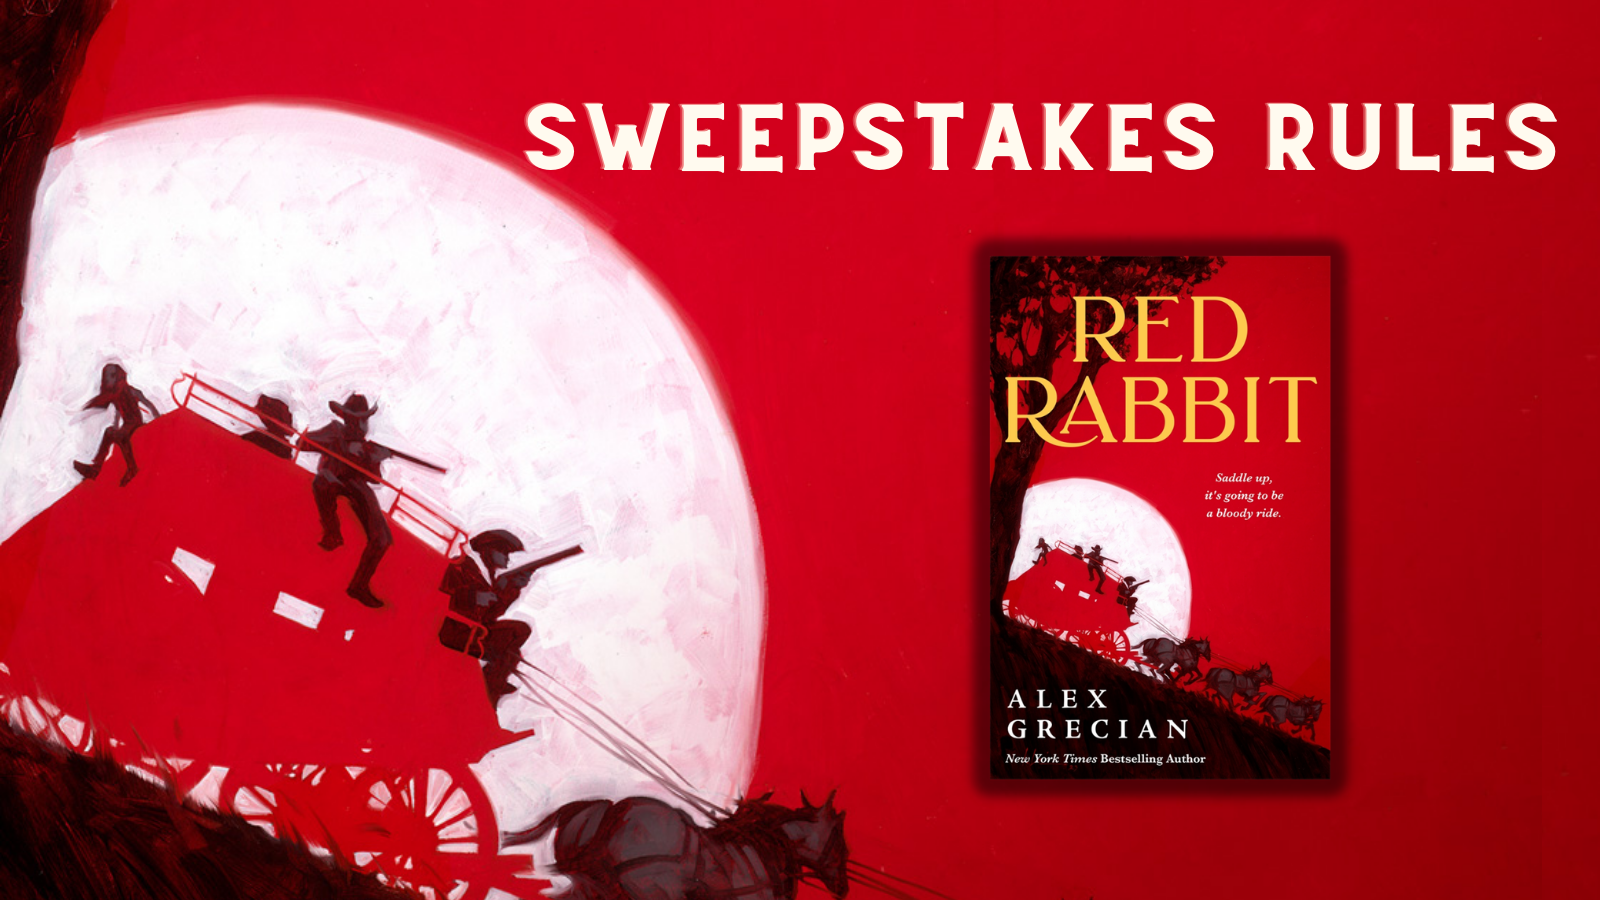 Red Rabbit Sweepstakes Rules - 333